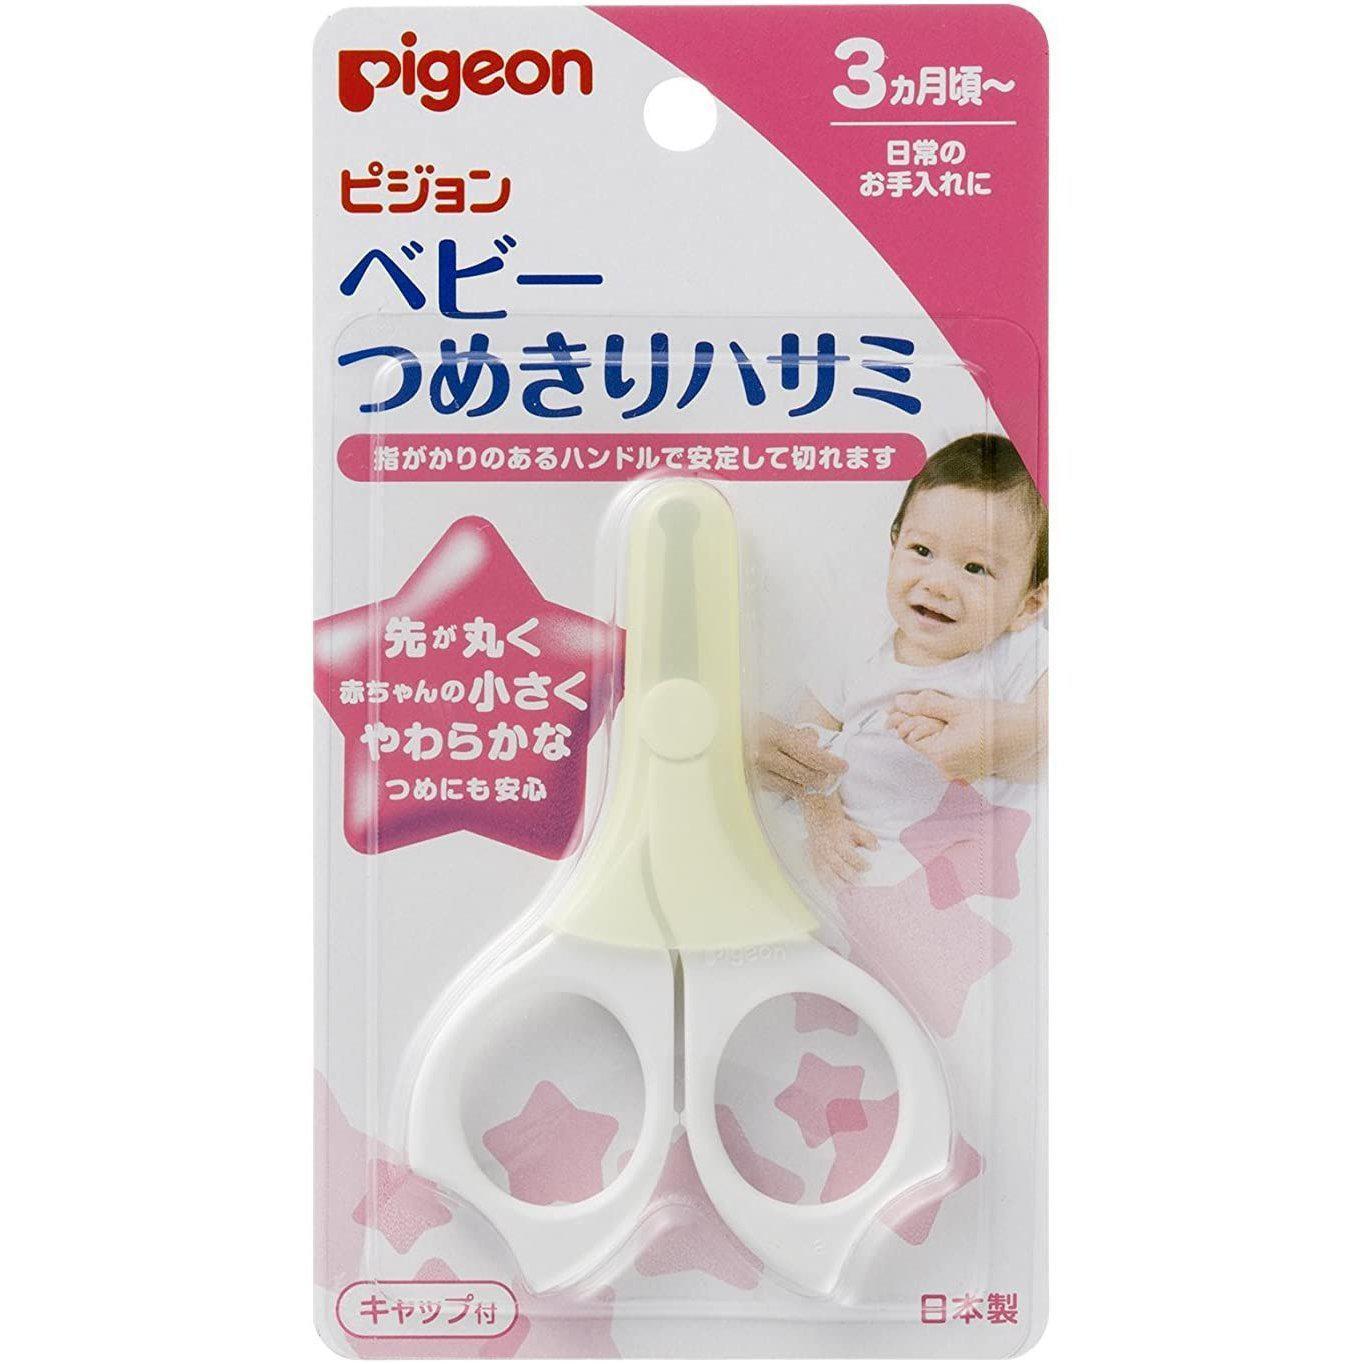 Pigeon Baby Safety Nail Scissors Clippers (3+ Months)